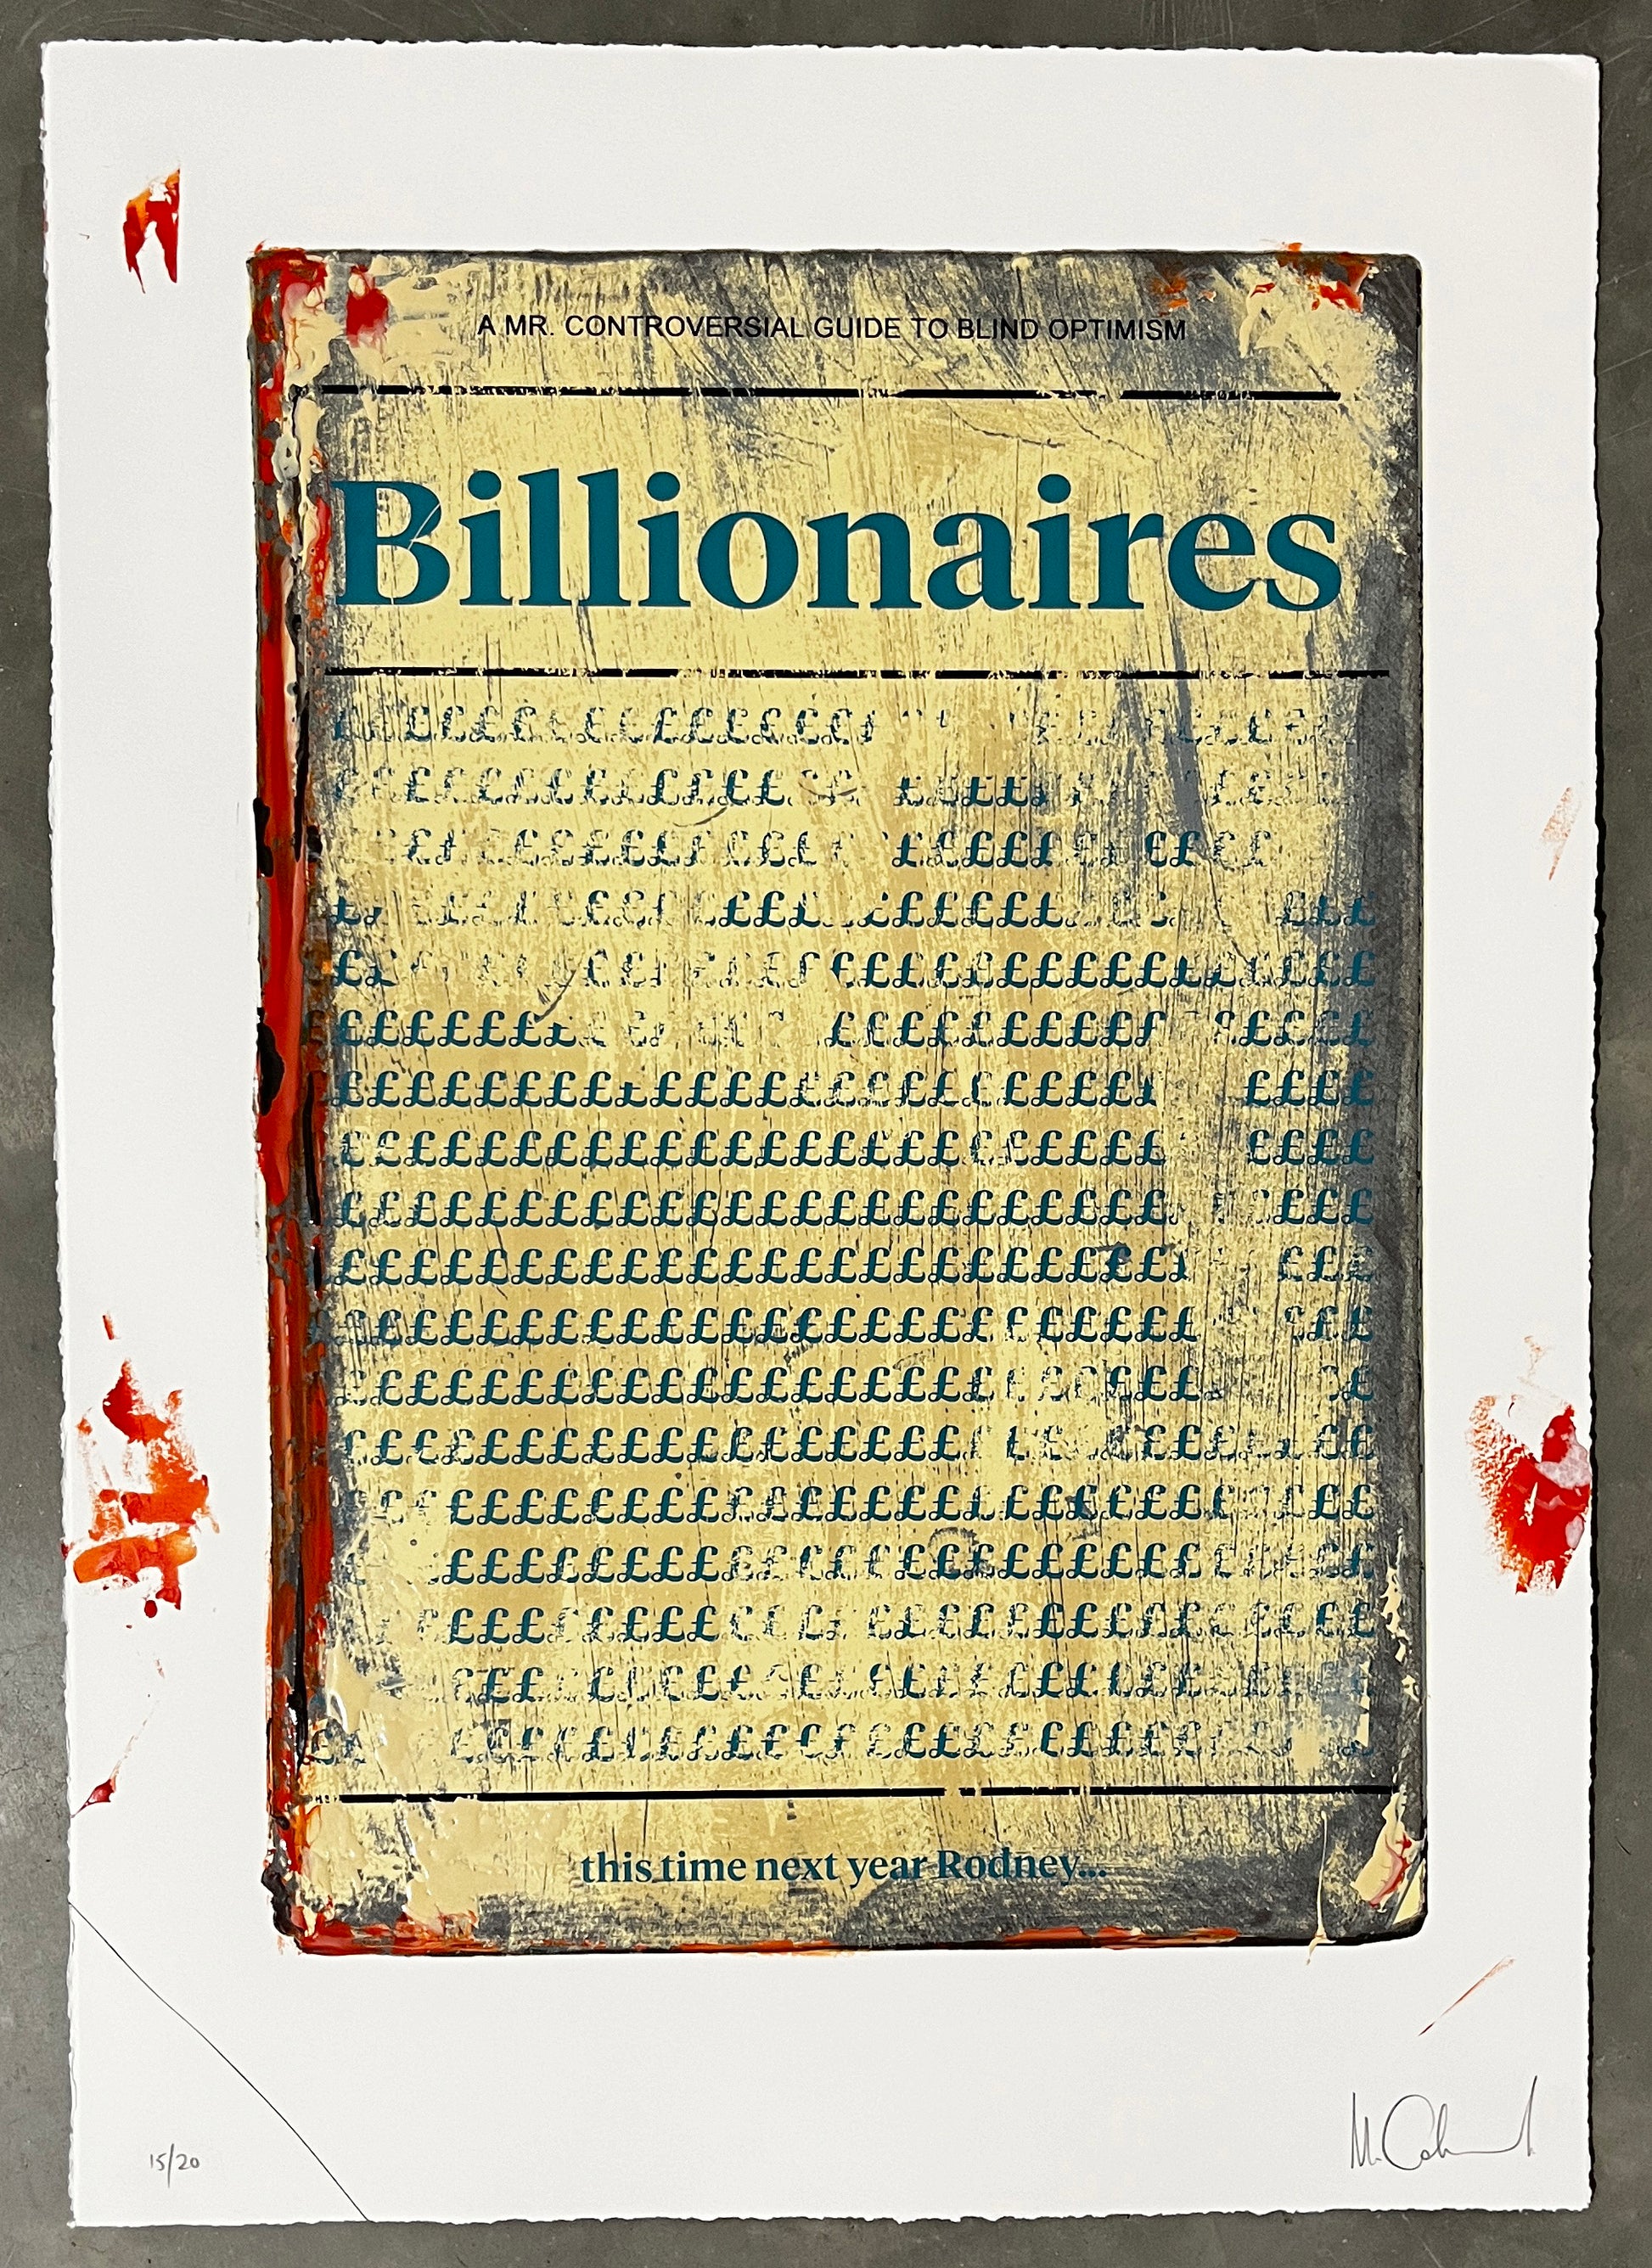 Mr Controversial, Artist, Billionaires, Edition 15, Hand-finished limited edition, TAP Galleries, Essex Chelmsford Art Gallery 